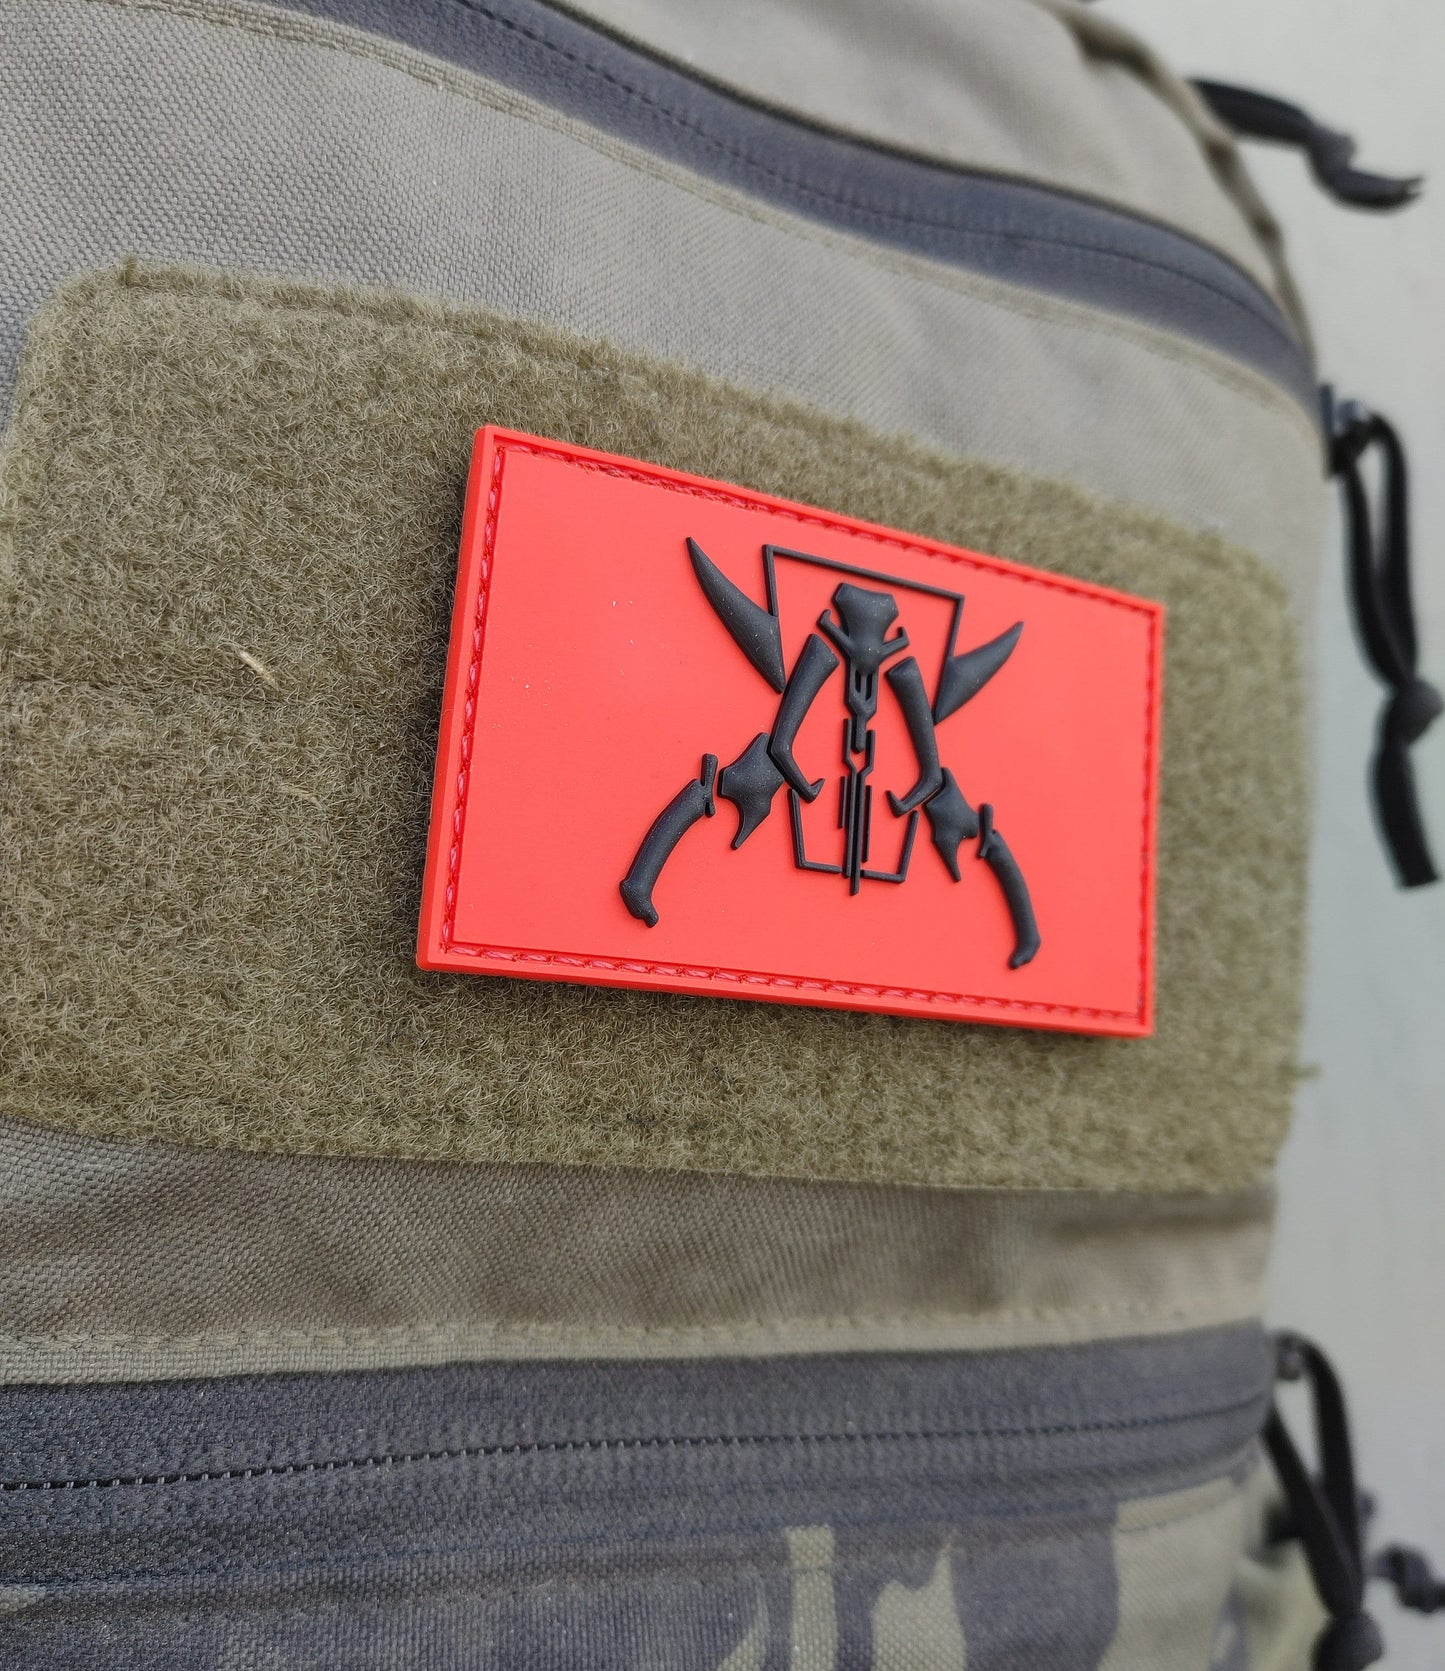 Jolly Mando - Mandalorian Jolly Roger Pirate Flag - Unique PVC Tactical Morale Patch - Star wars inspired Gift Mythosaur